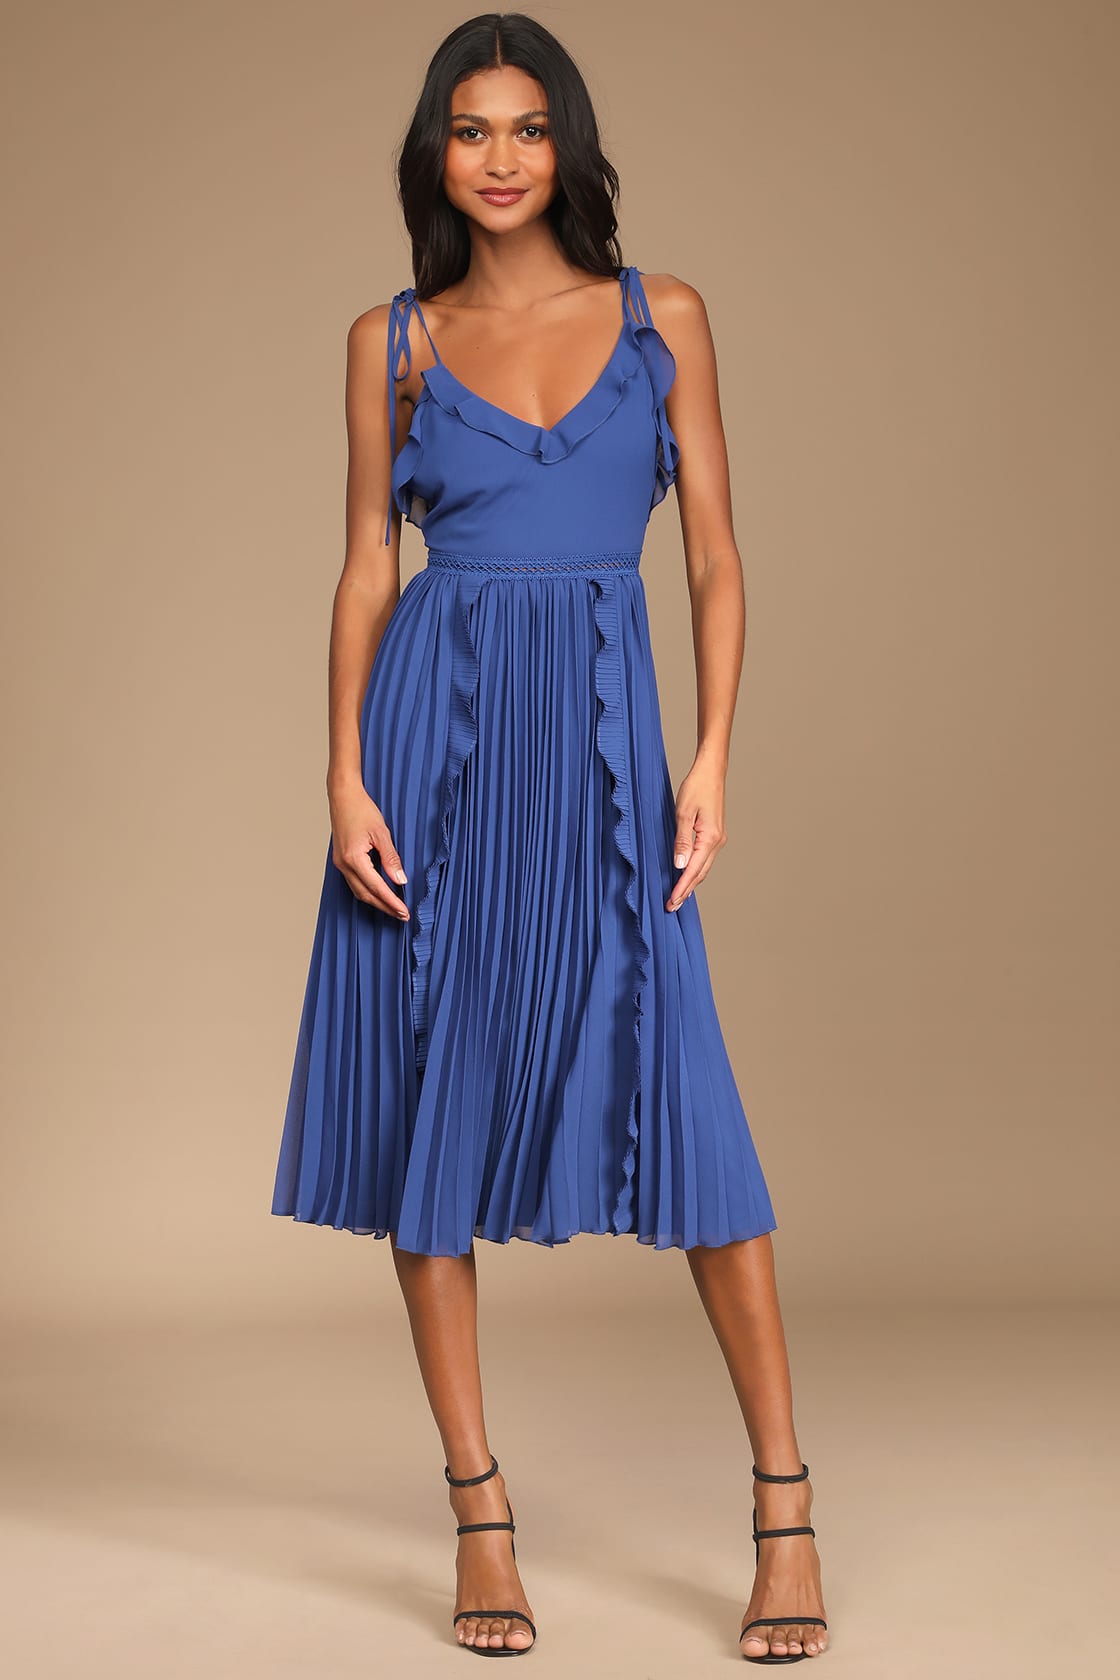 Never a Dull Moment Royal Blue Tie-Strap Pleated Midi Dress